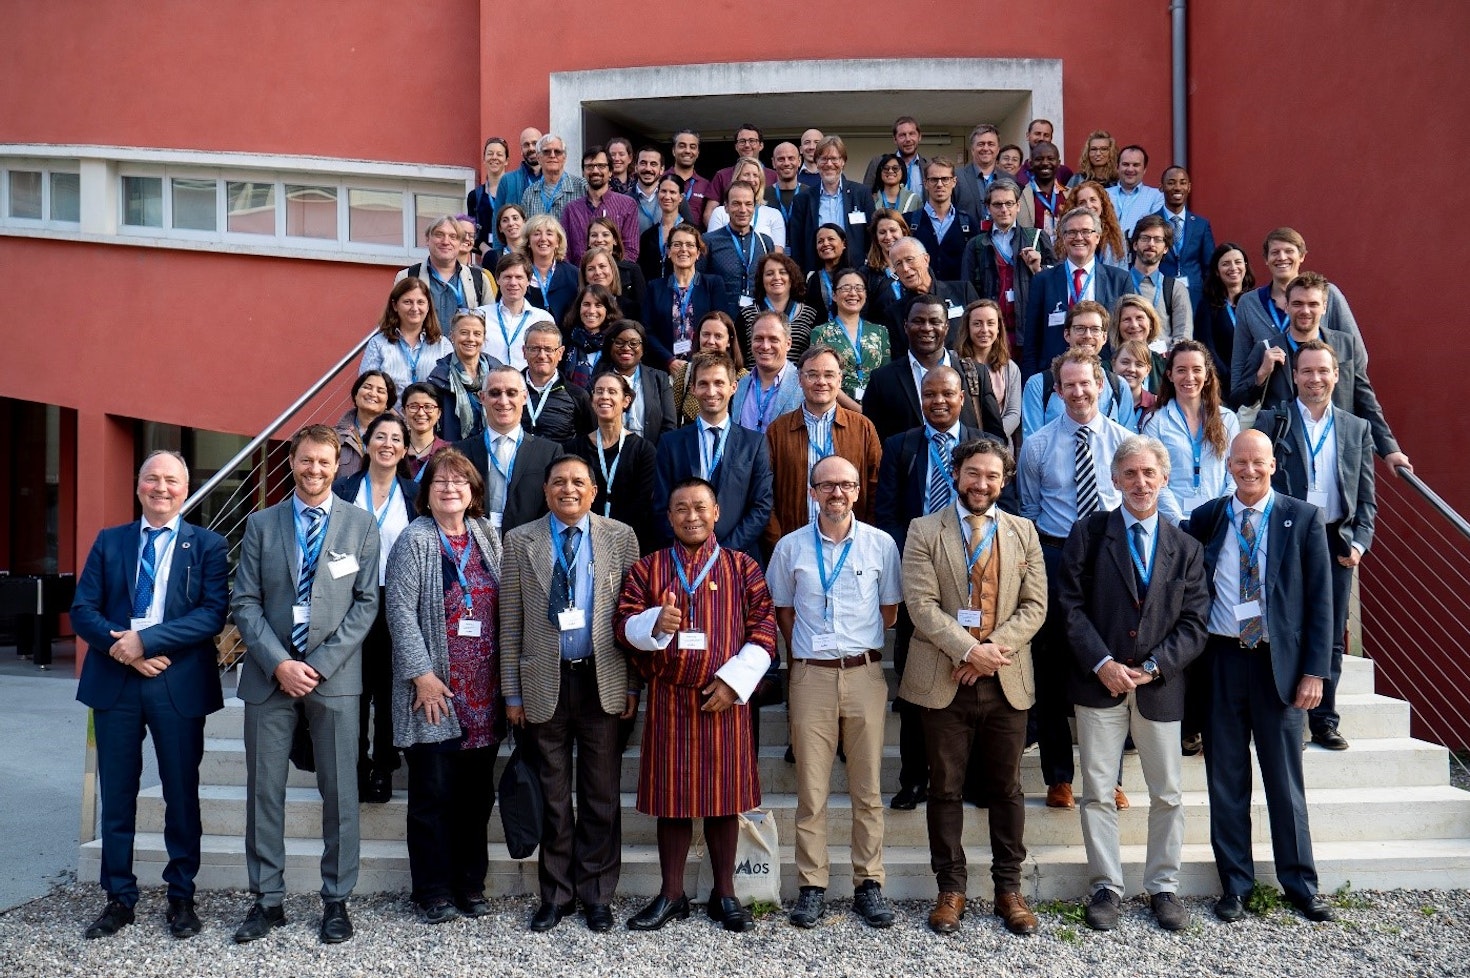 From 17th to 19th October 2018, Eurac Research hosted the GLOMOS Kick-off Workshop, an international conference with 150 experts between researchers, practitioners and UN representatives. The workshop addressed the topic “Global Mountain Safeguard Research”.